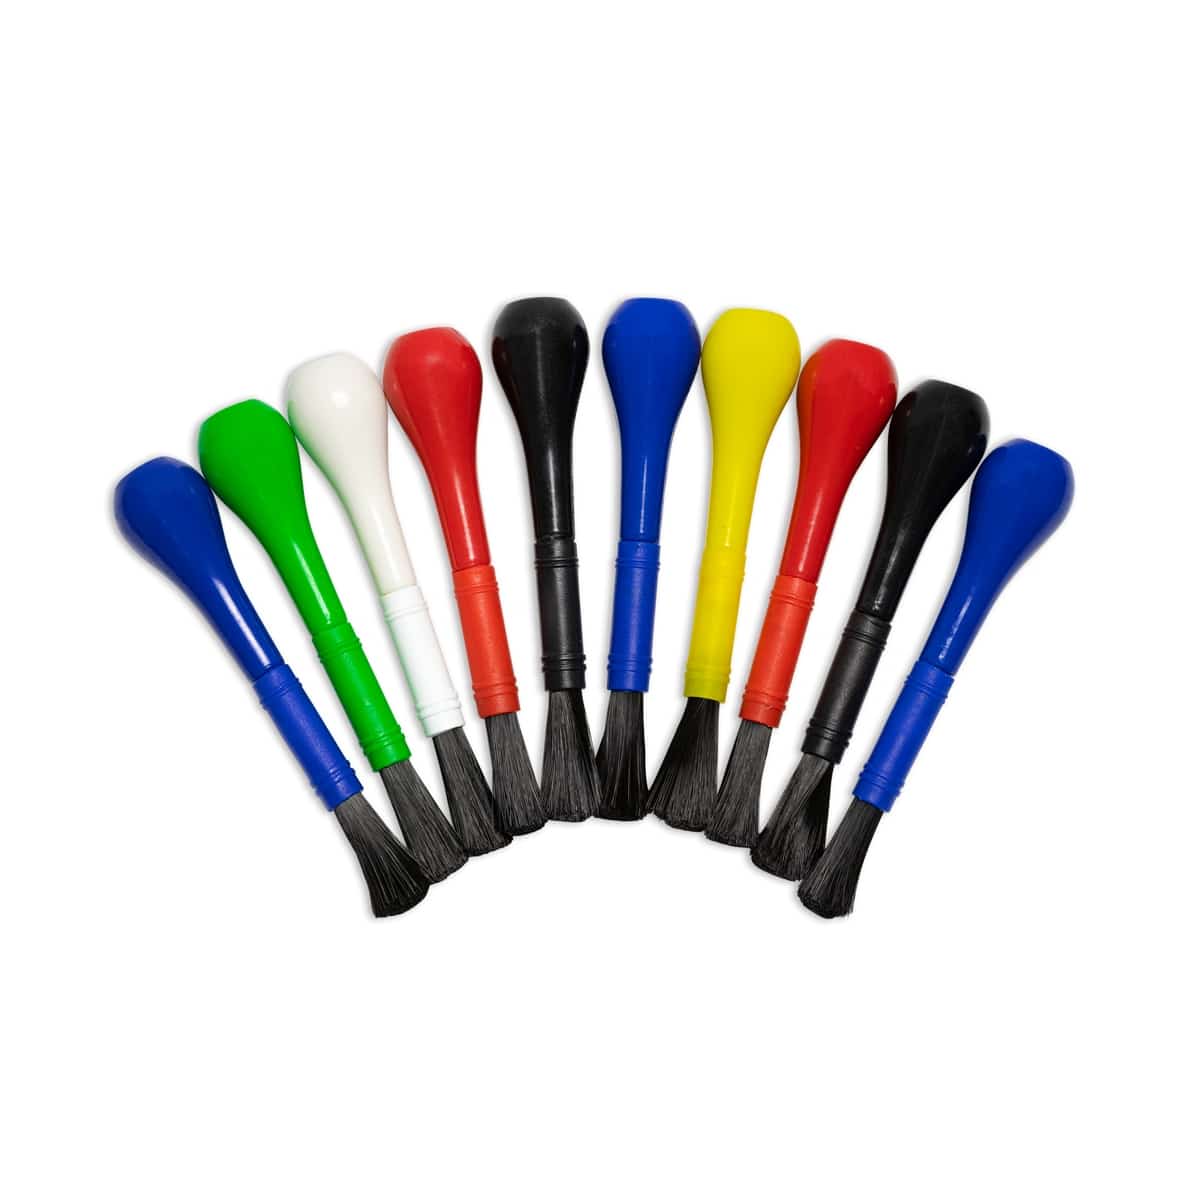 Easy-Grip Paint Brushes - 10 Pack